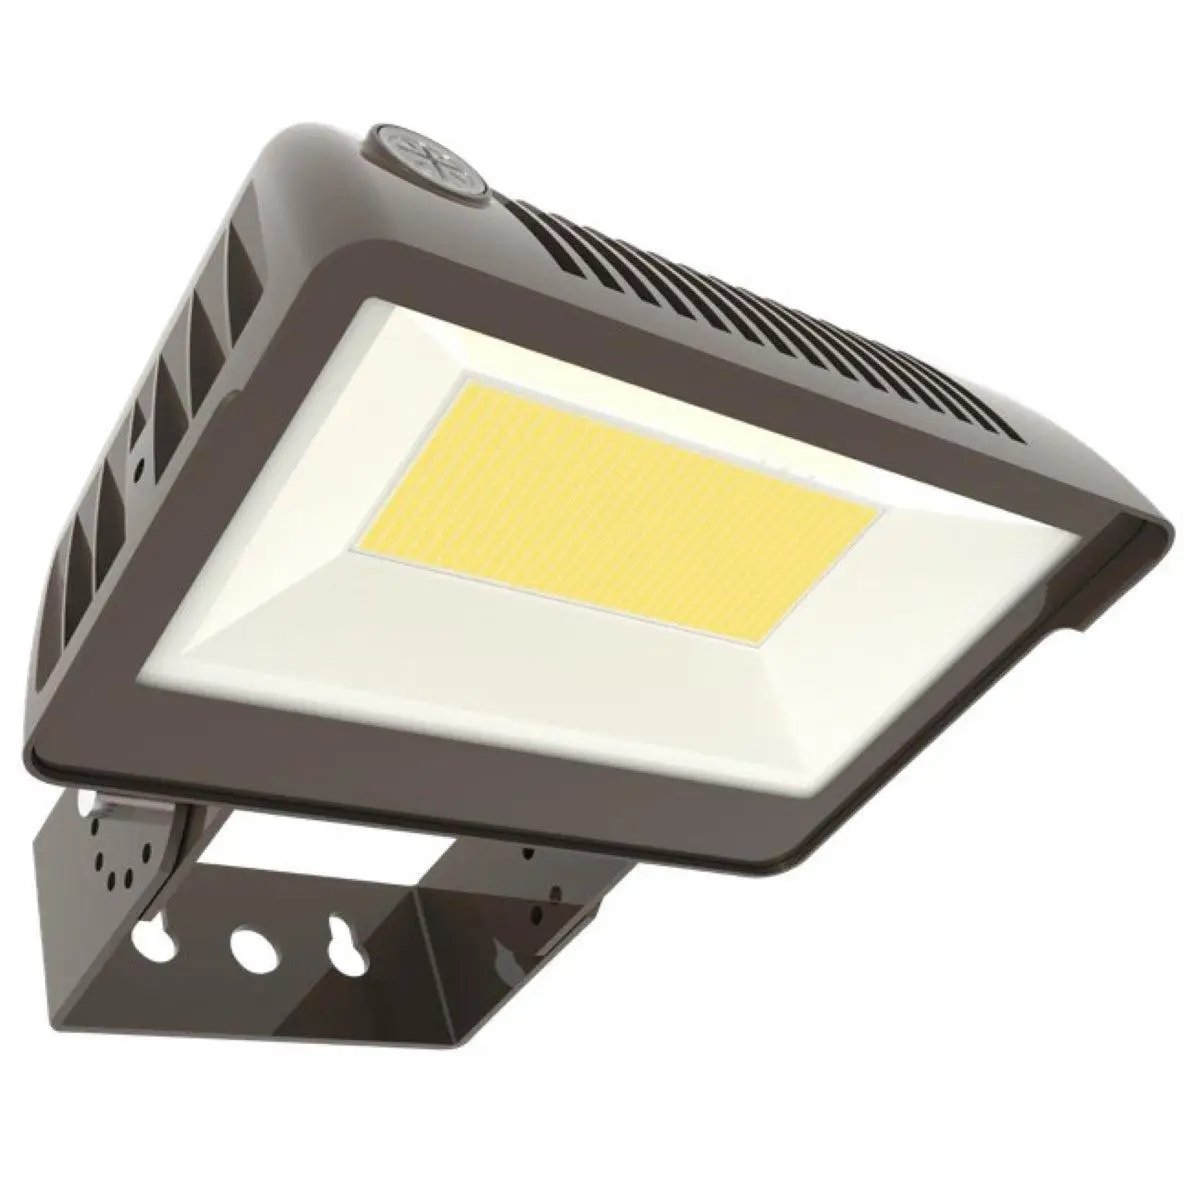 Outside Flood Light with color adjustable white light, universal mounting options, and built-in photocell for energy savings. 14300 lumens, 100W, LED. UL Listed, IP65 Rated, DLC Premium Listed. Slip Fitter, Trunnion mount. 3000K, 4000K, 5000K color temperature. 5-year warranty.